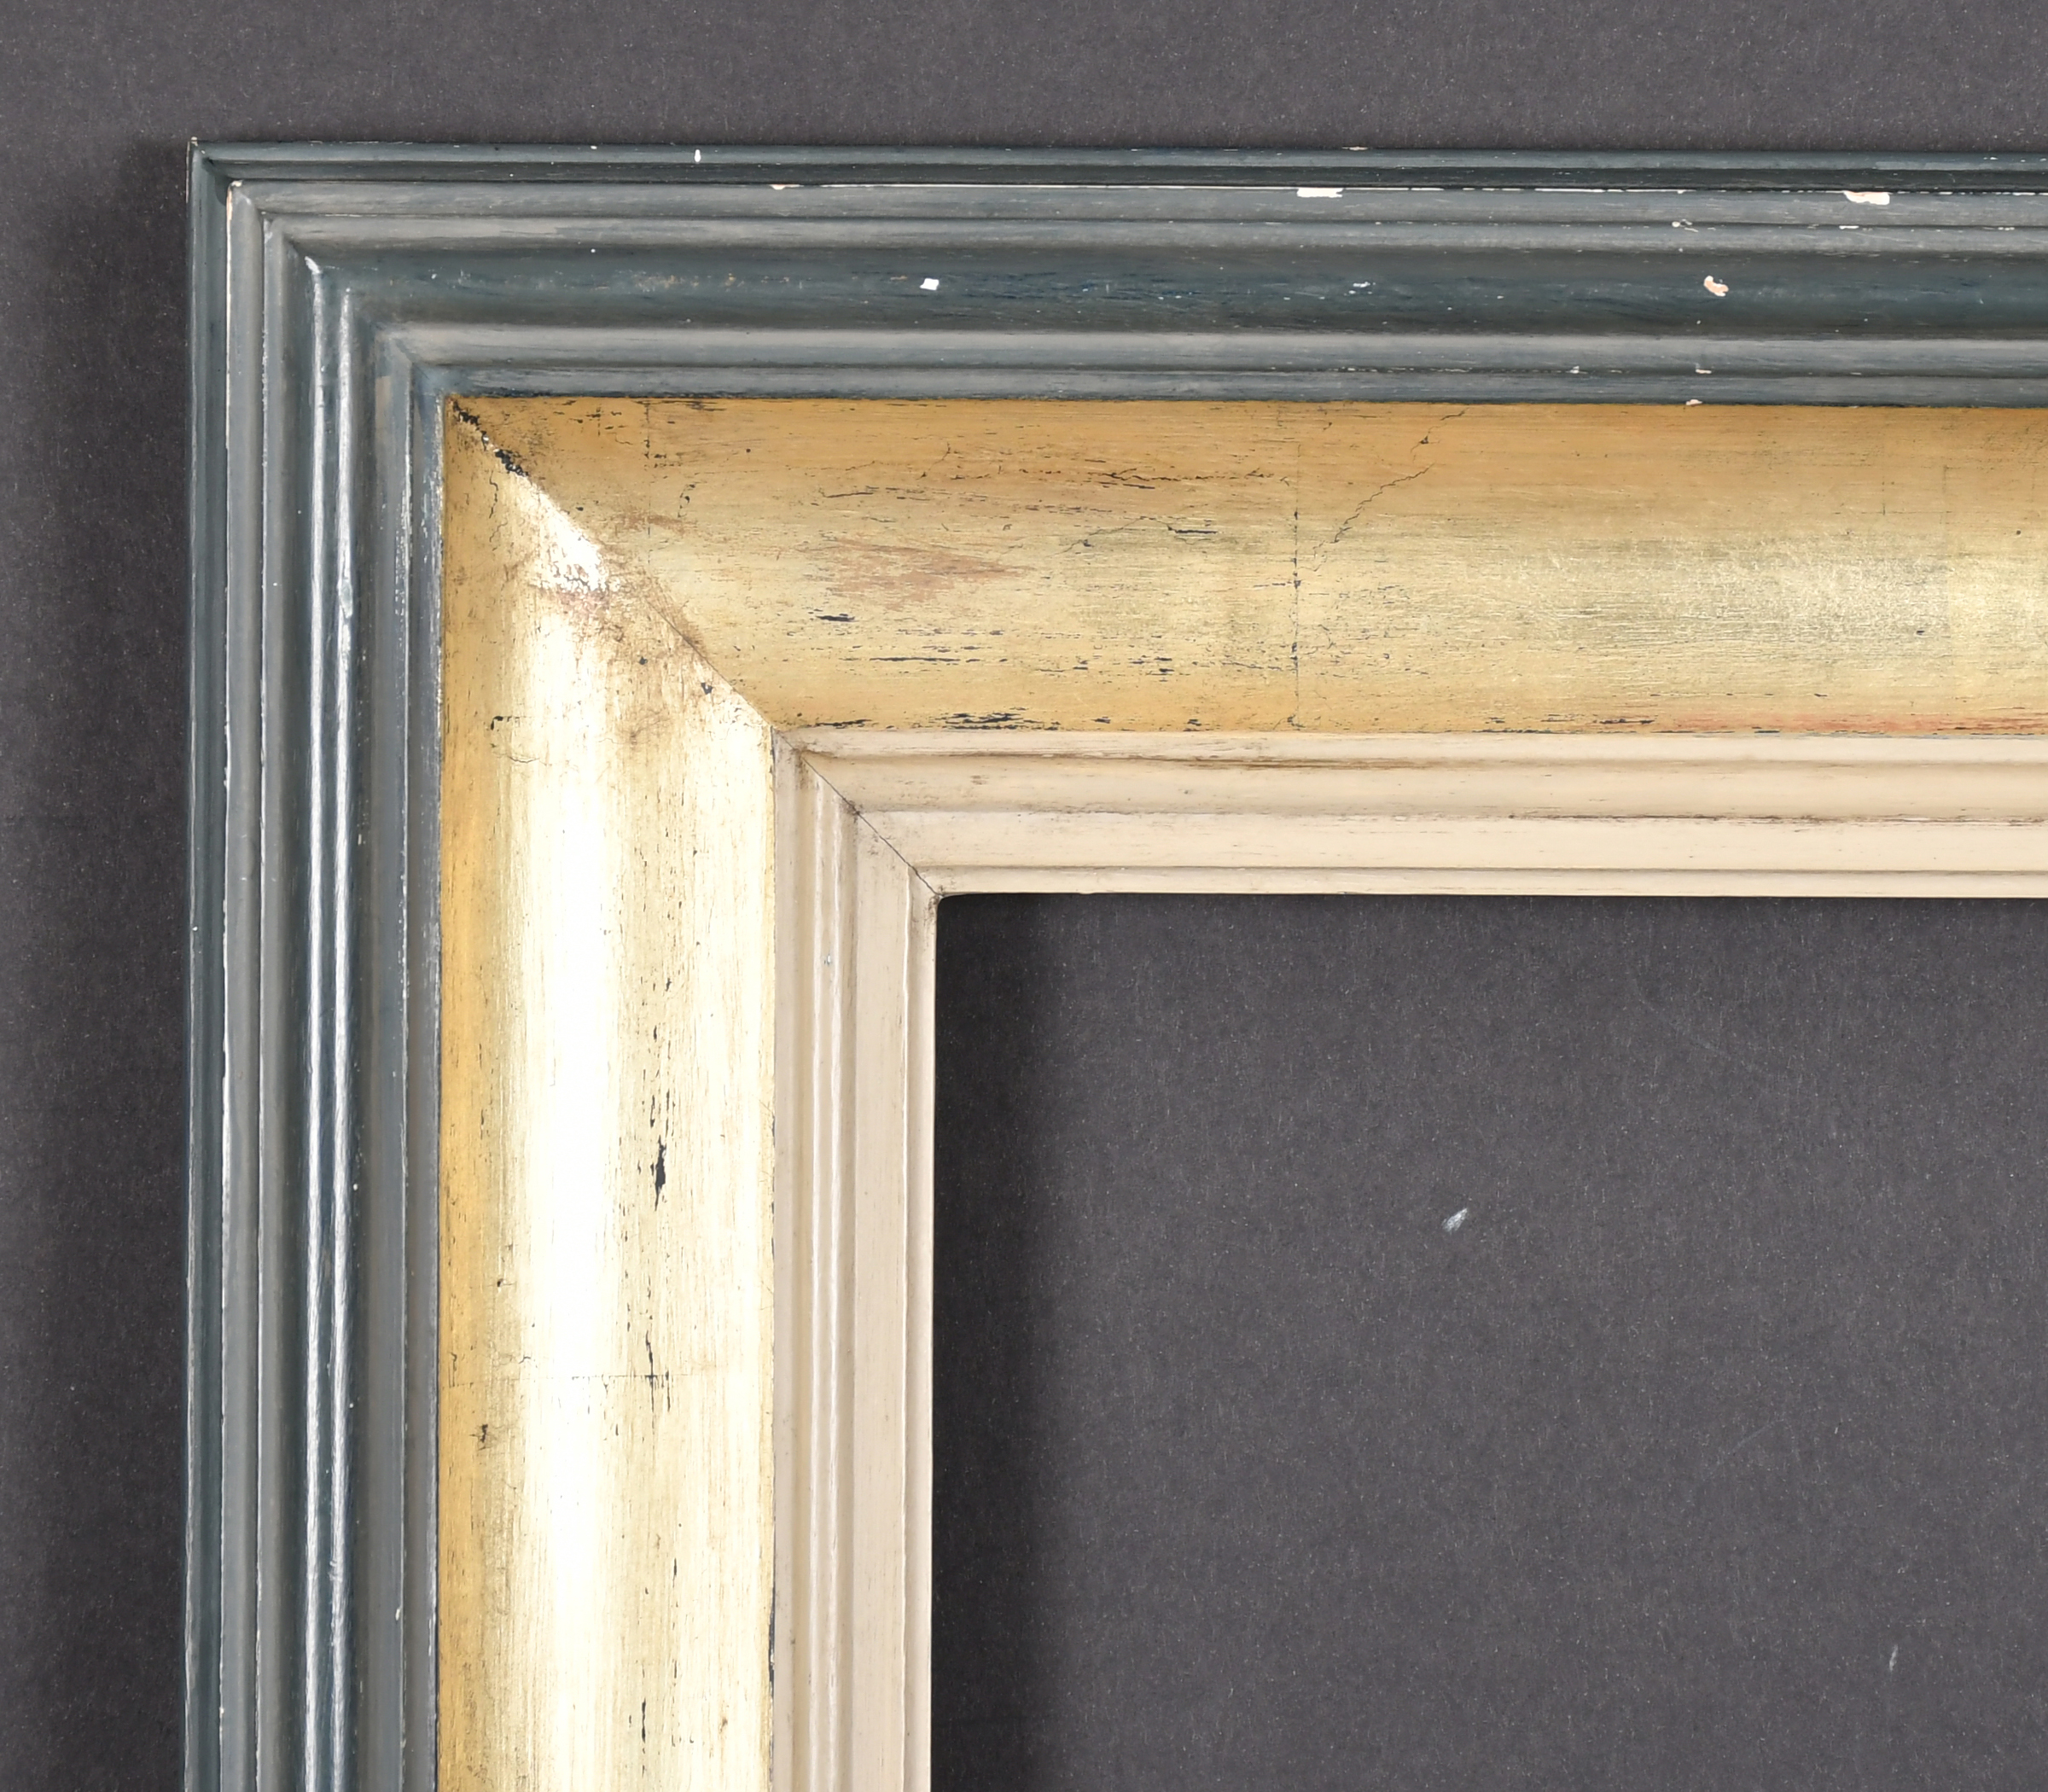 20th Century English School. A Hollow Painted Frame, rebate 17.25" x 14" (43.8 x 35.5cm)